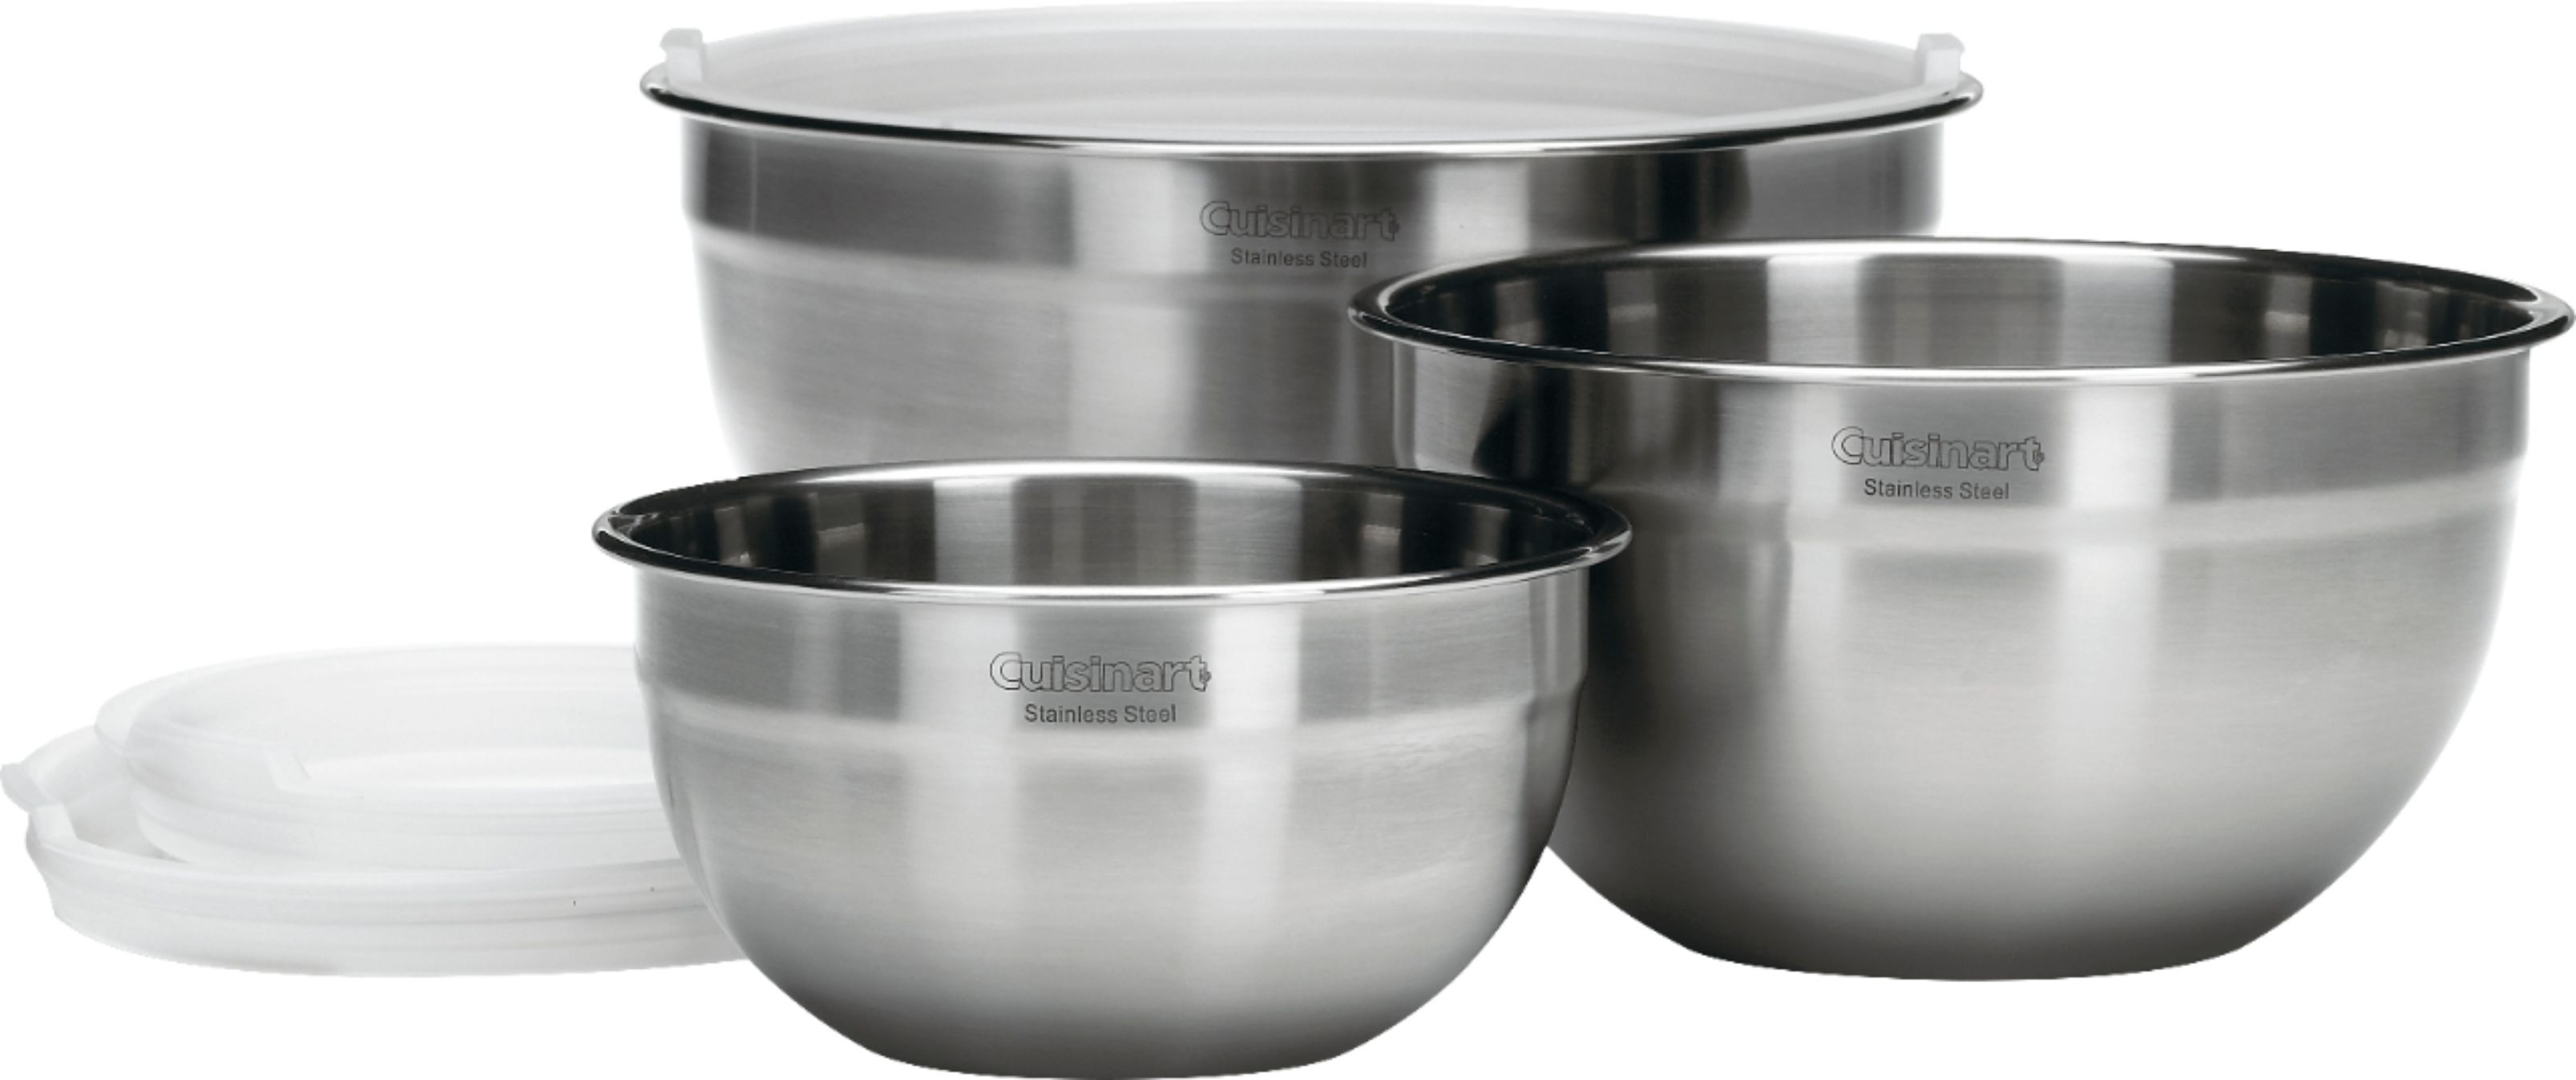 Angle View: Cuisinart - 3pk Mixing bowls w lids - Stainless steel